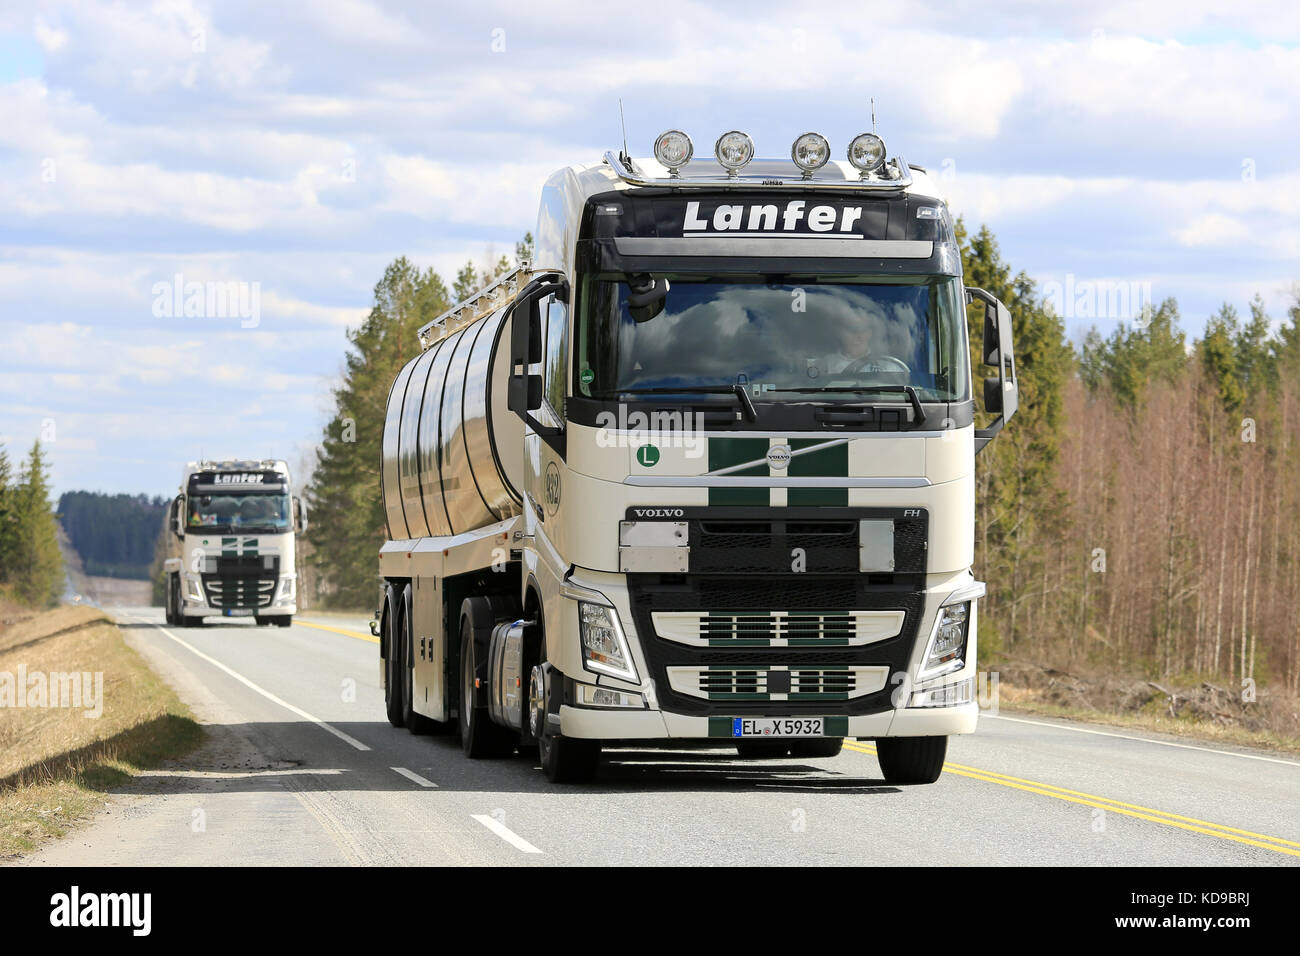 JOKIOINEN, FINLAND - MAY 7, 2017: Two Volvo FH semi tank trucks of Lanfer Logistik move along highway in convoy on a beautiful day. Stock Photo